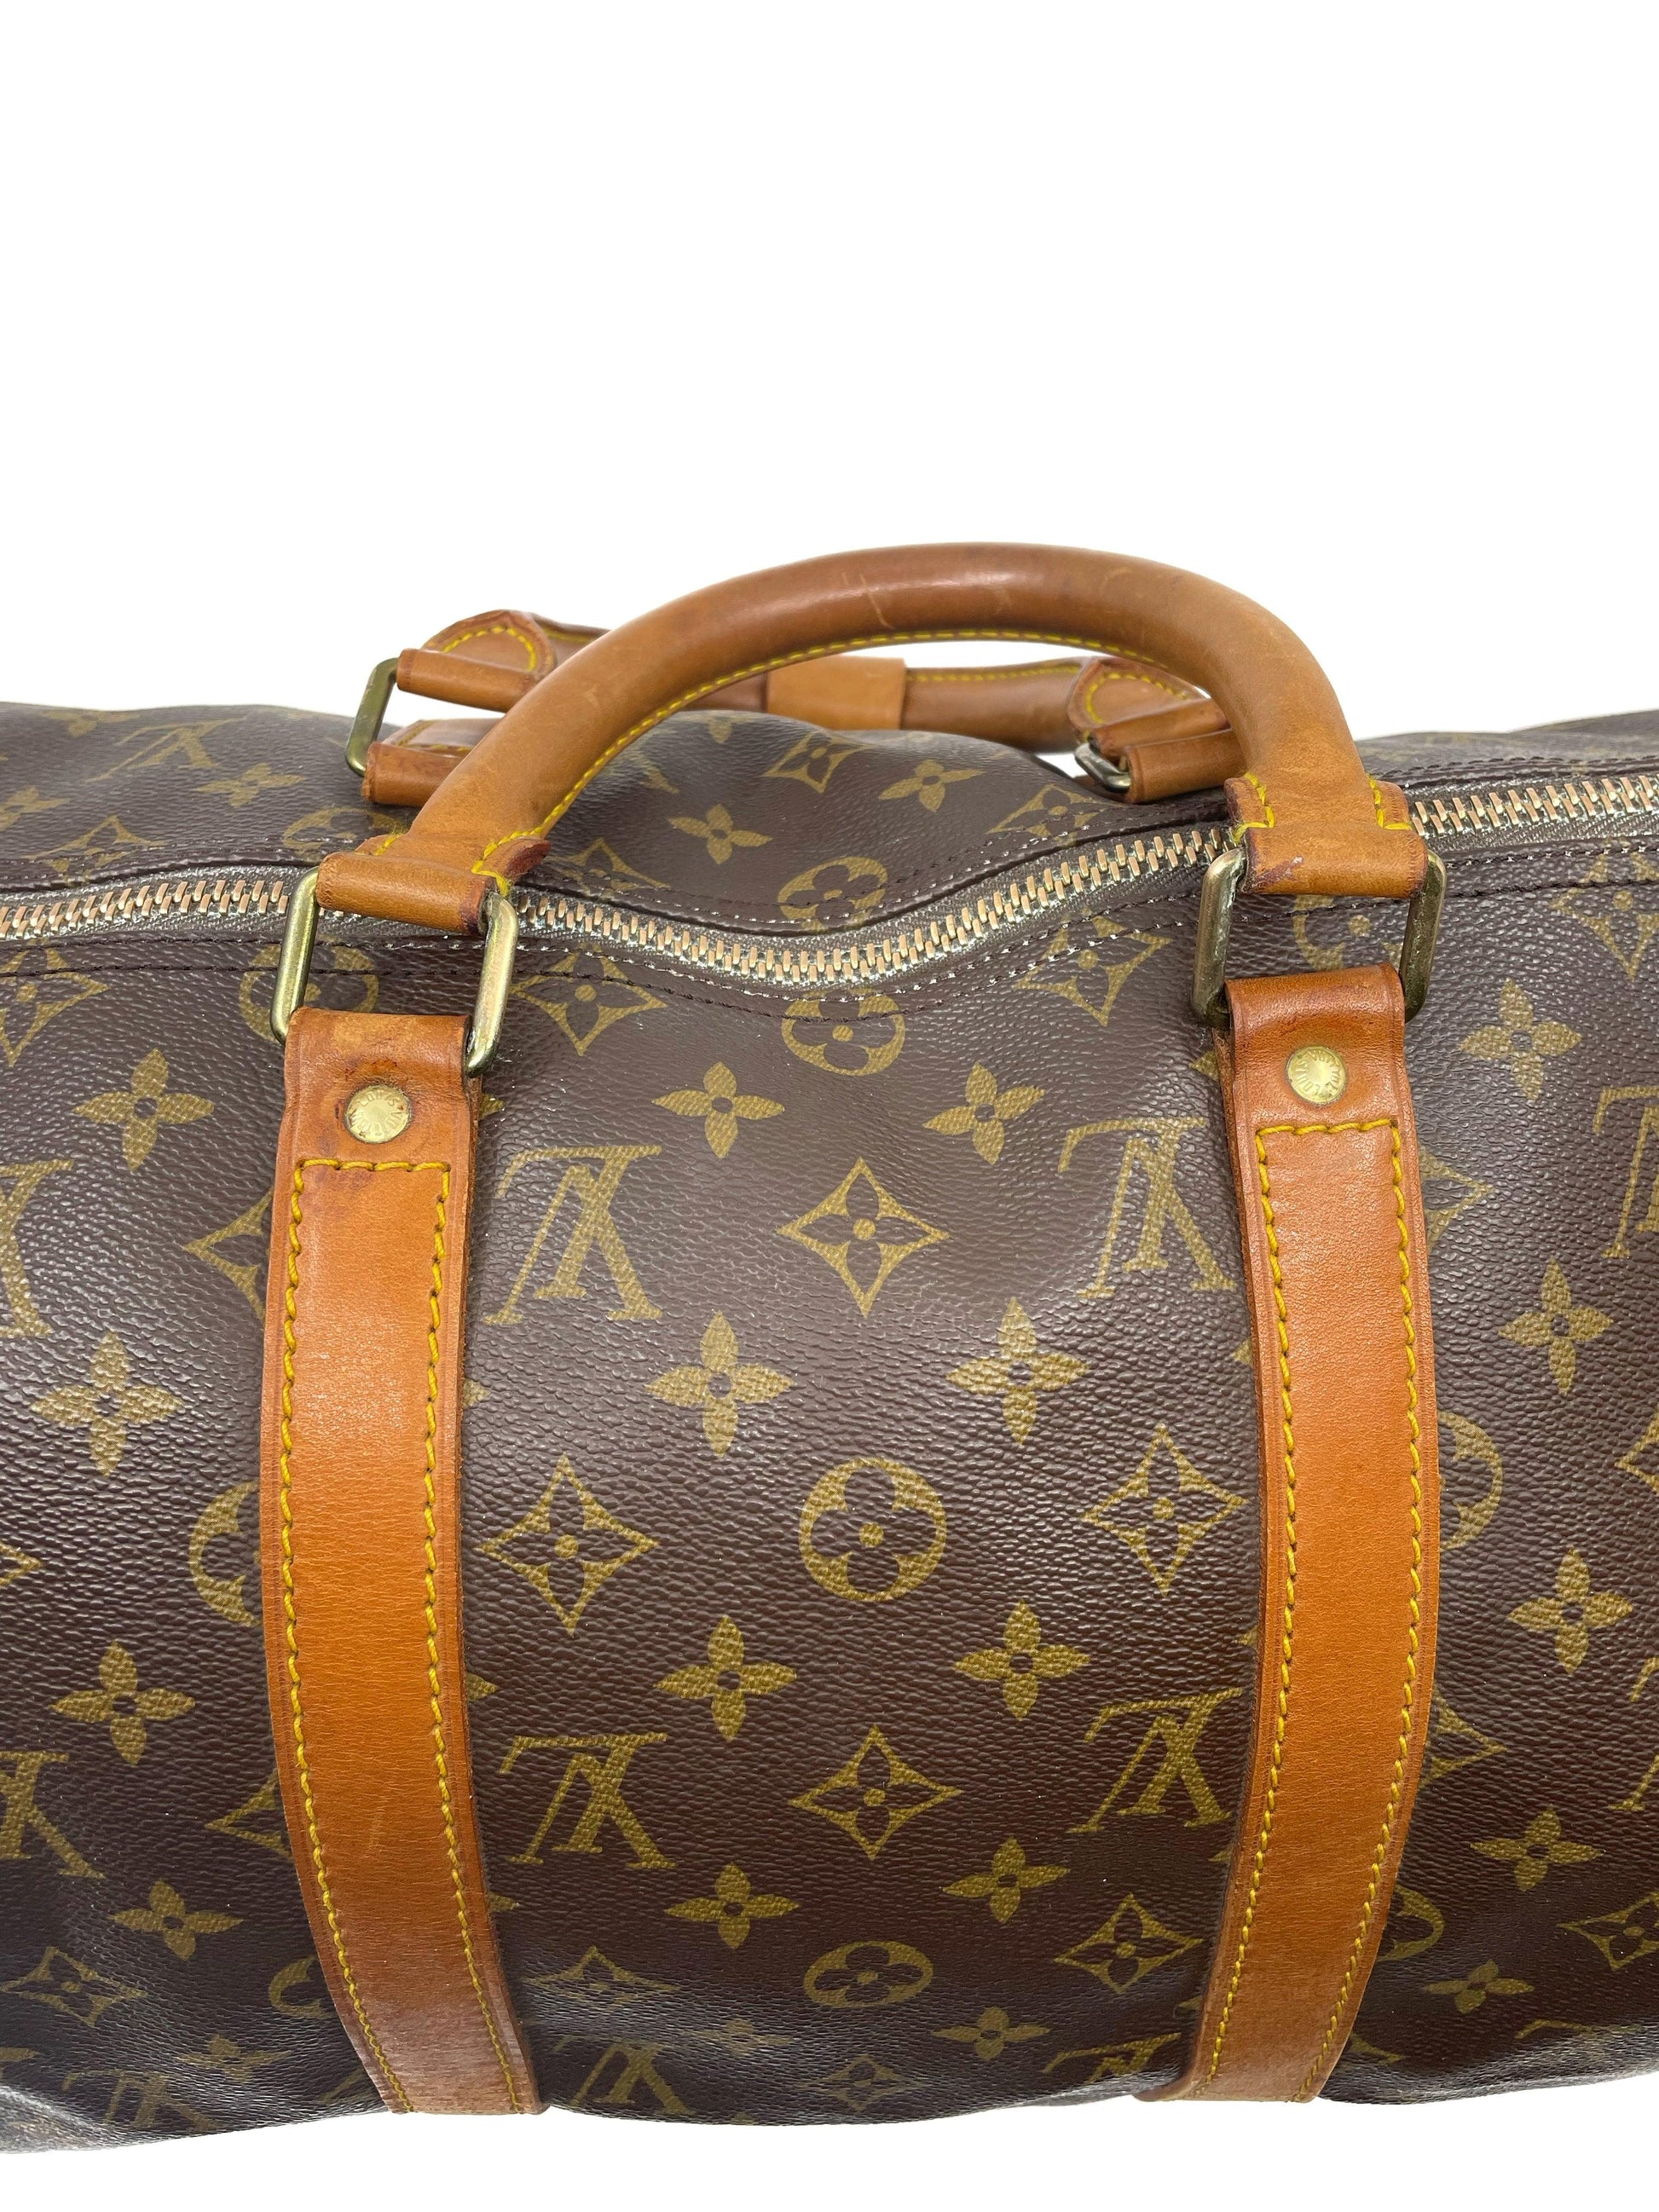 Vintage Louis Vuitton Keepall 45 From The 80's. Sourced For $200